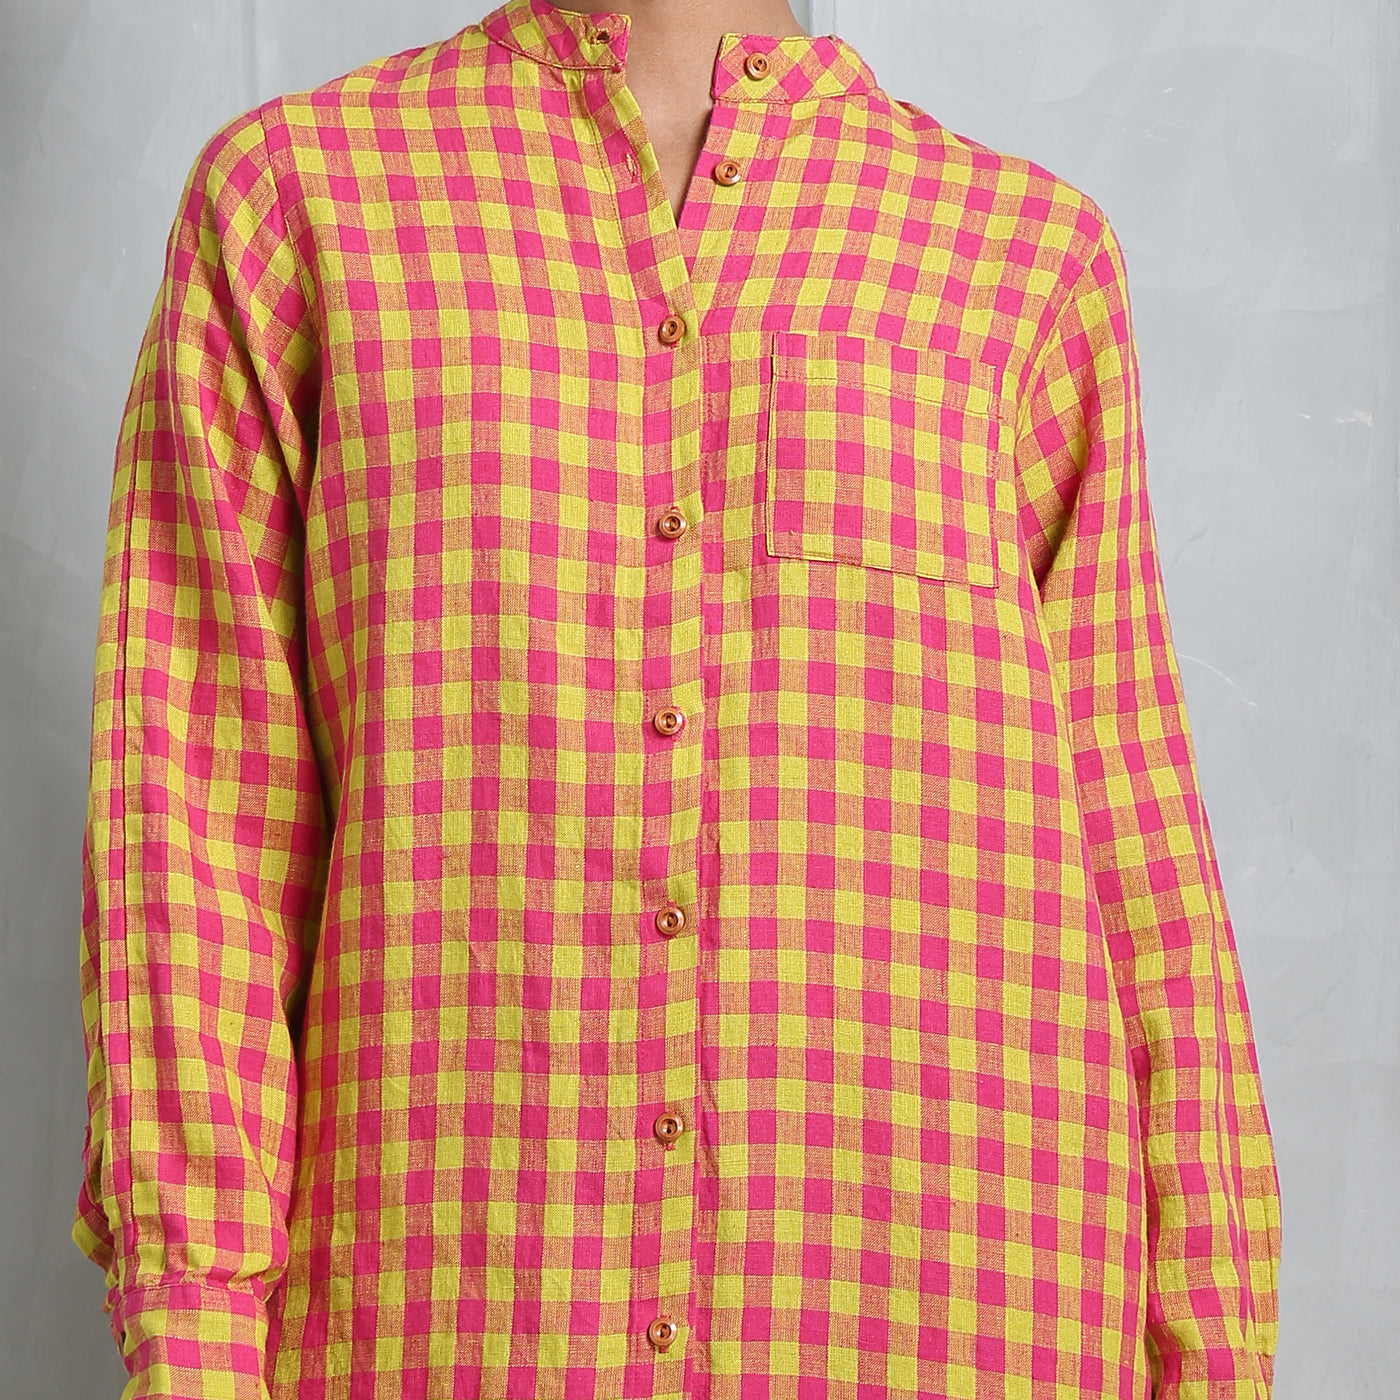 Saphed Chaukor Checkered Dress  featuring a red and yellow checkered print.